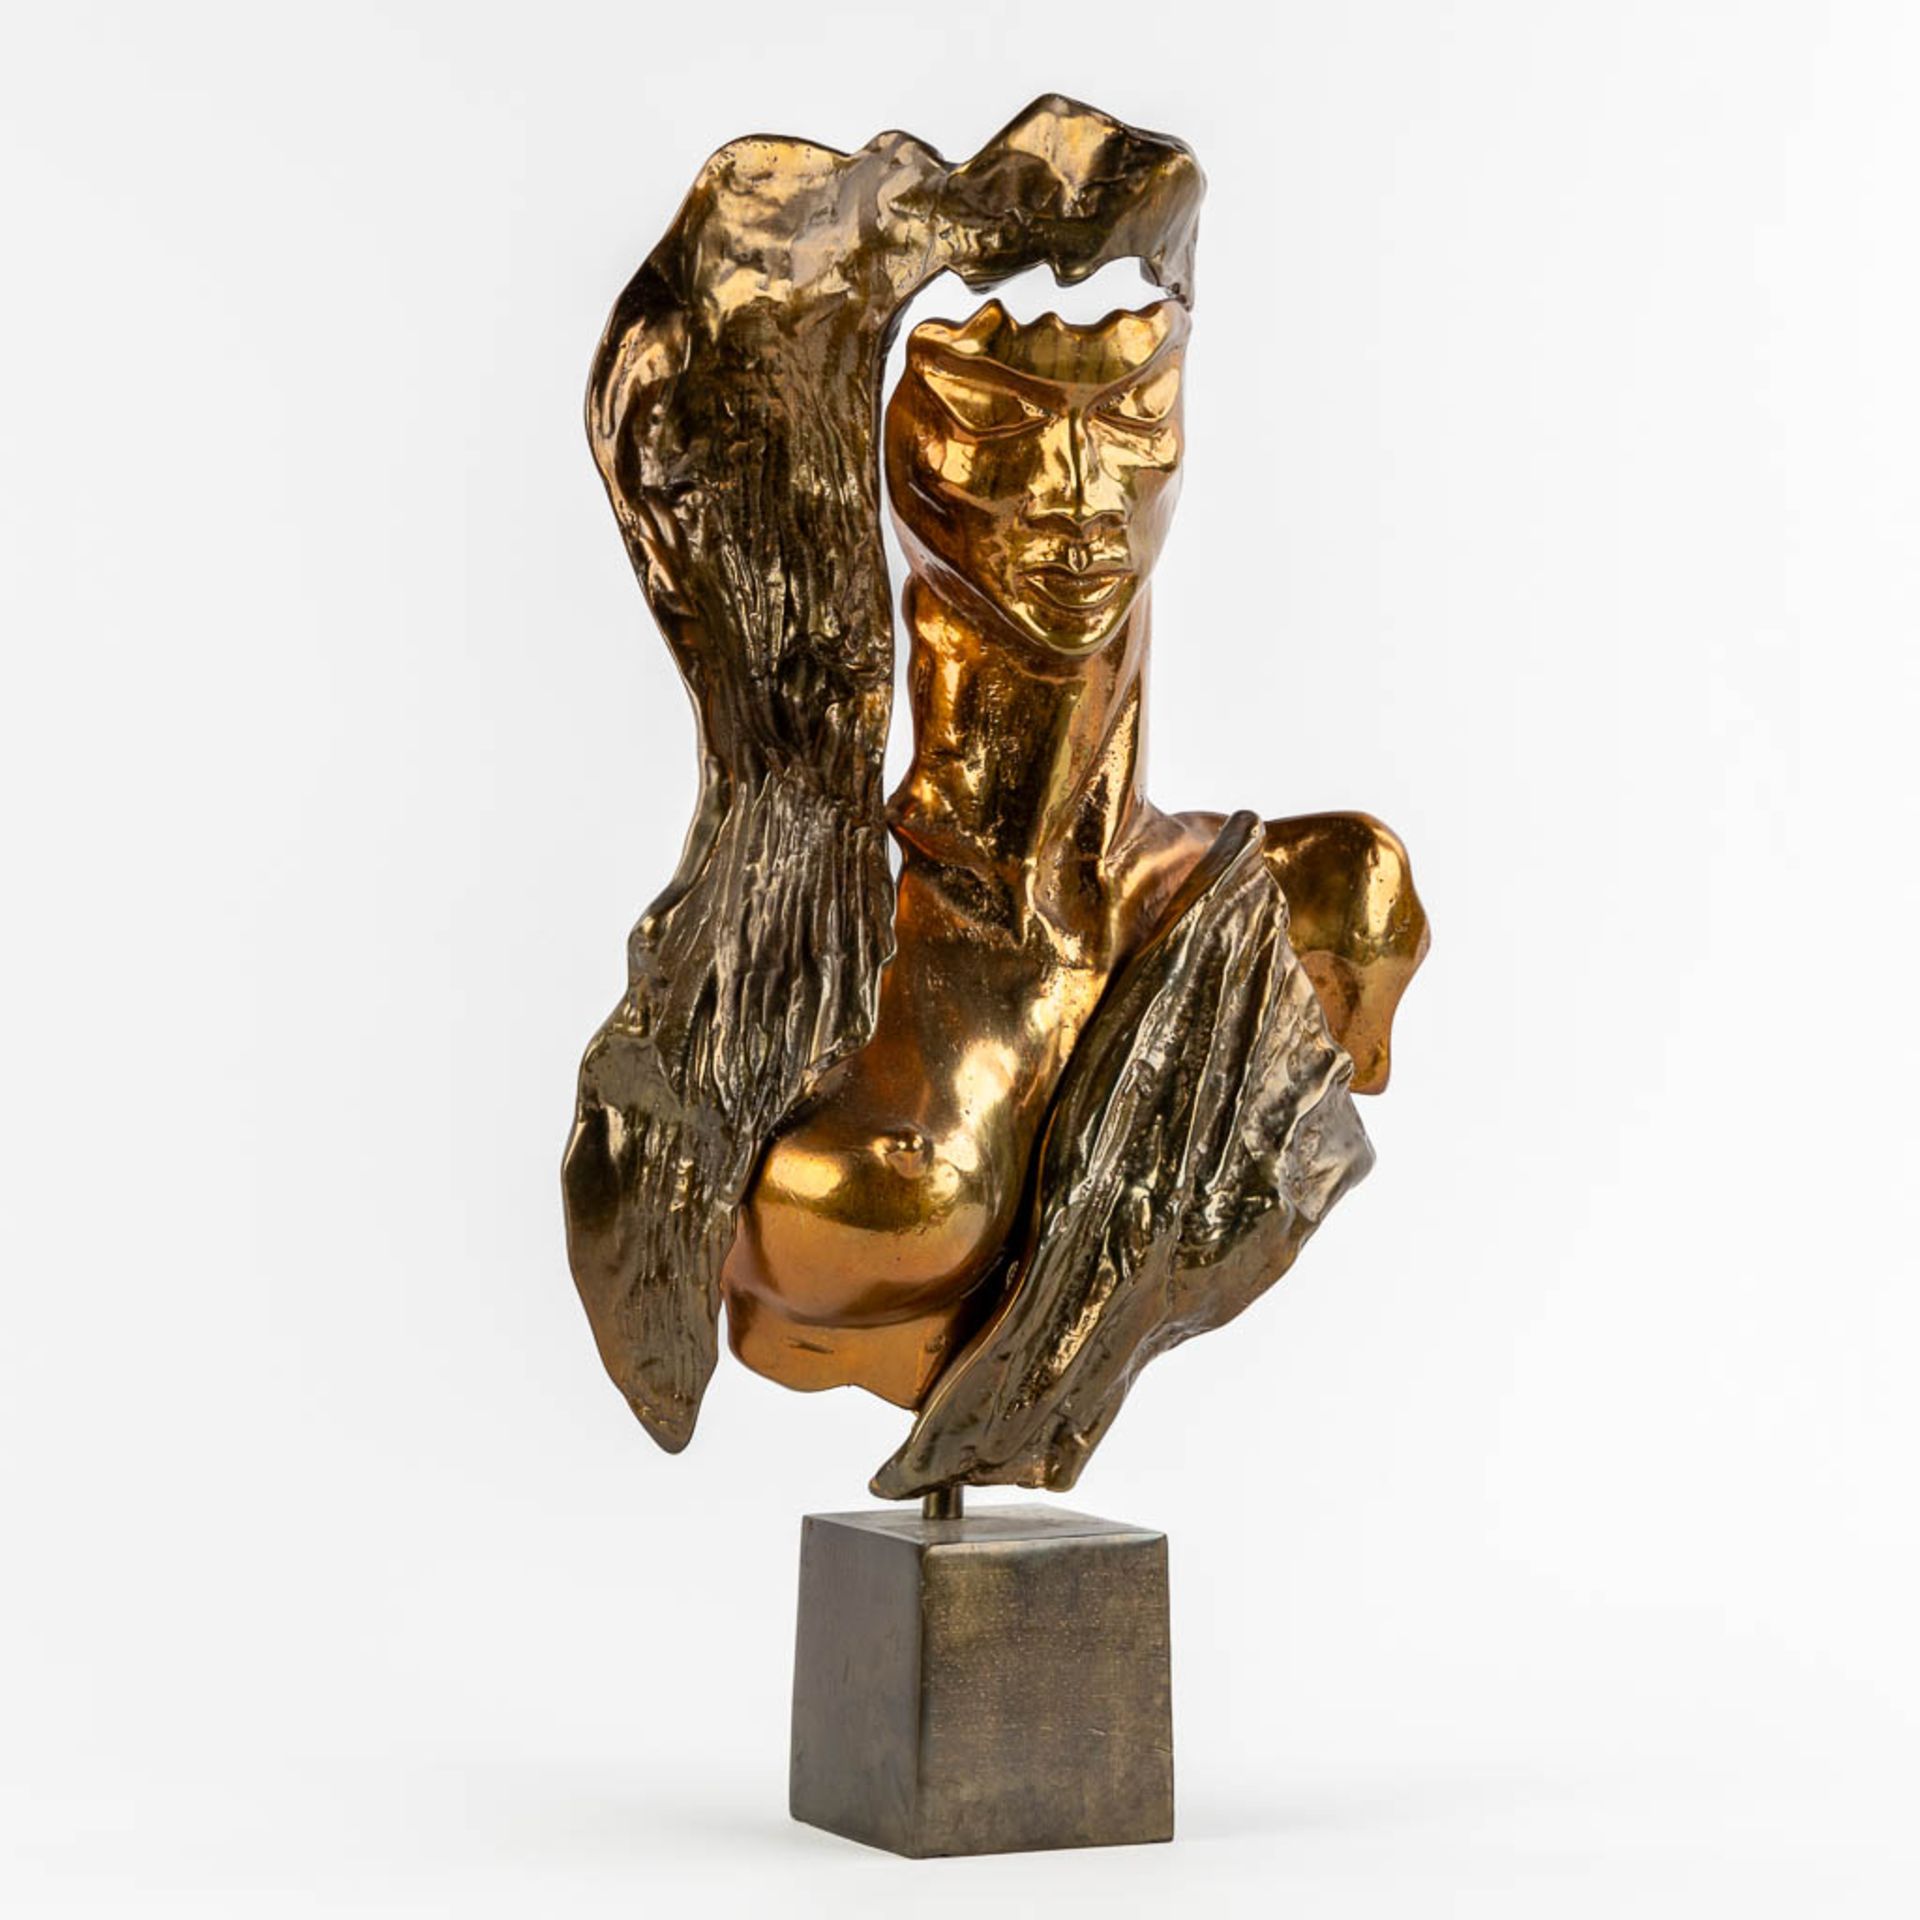 Yves LOHE (1947) 'Figure of a Lady' patinated bronze. (L:13 x W:29 x H:54 cm)